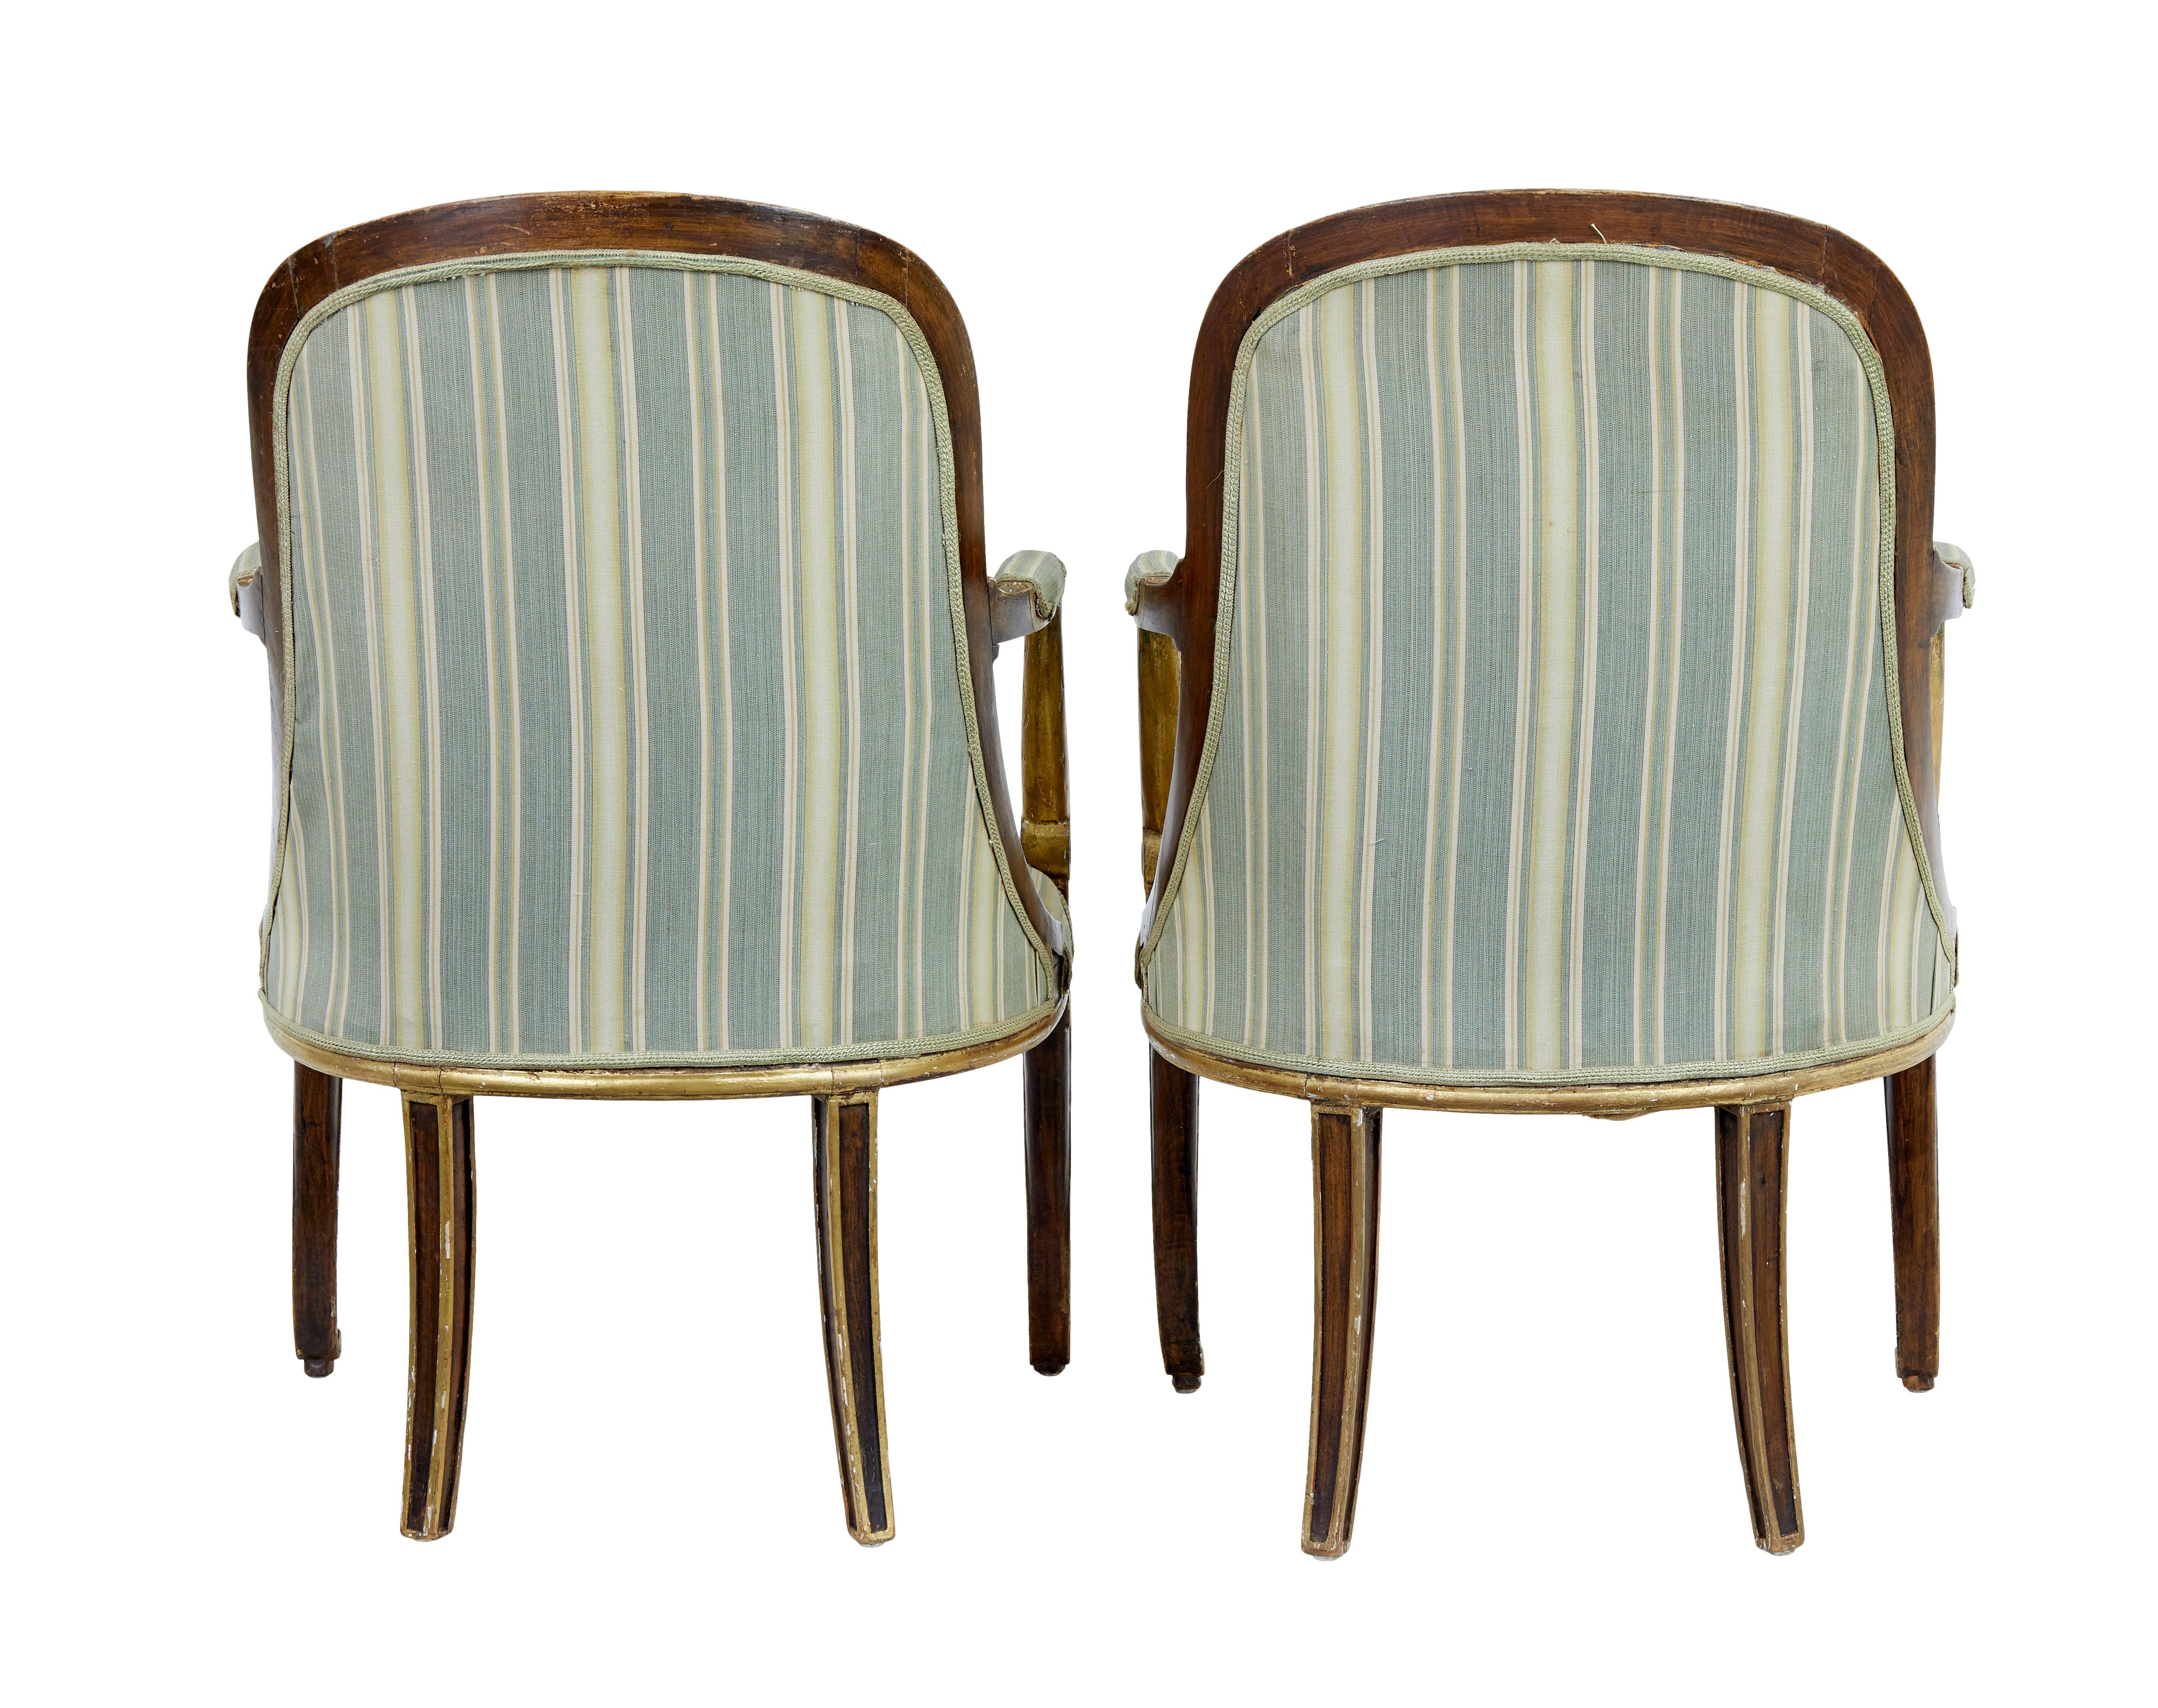 Pair of mid 19th century French walnut and gilt armchairs 3